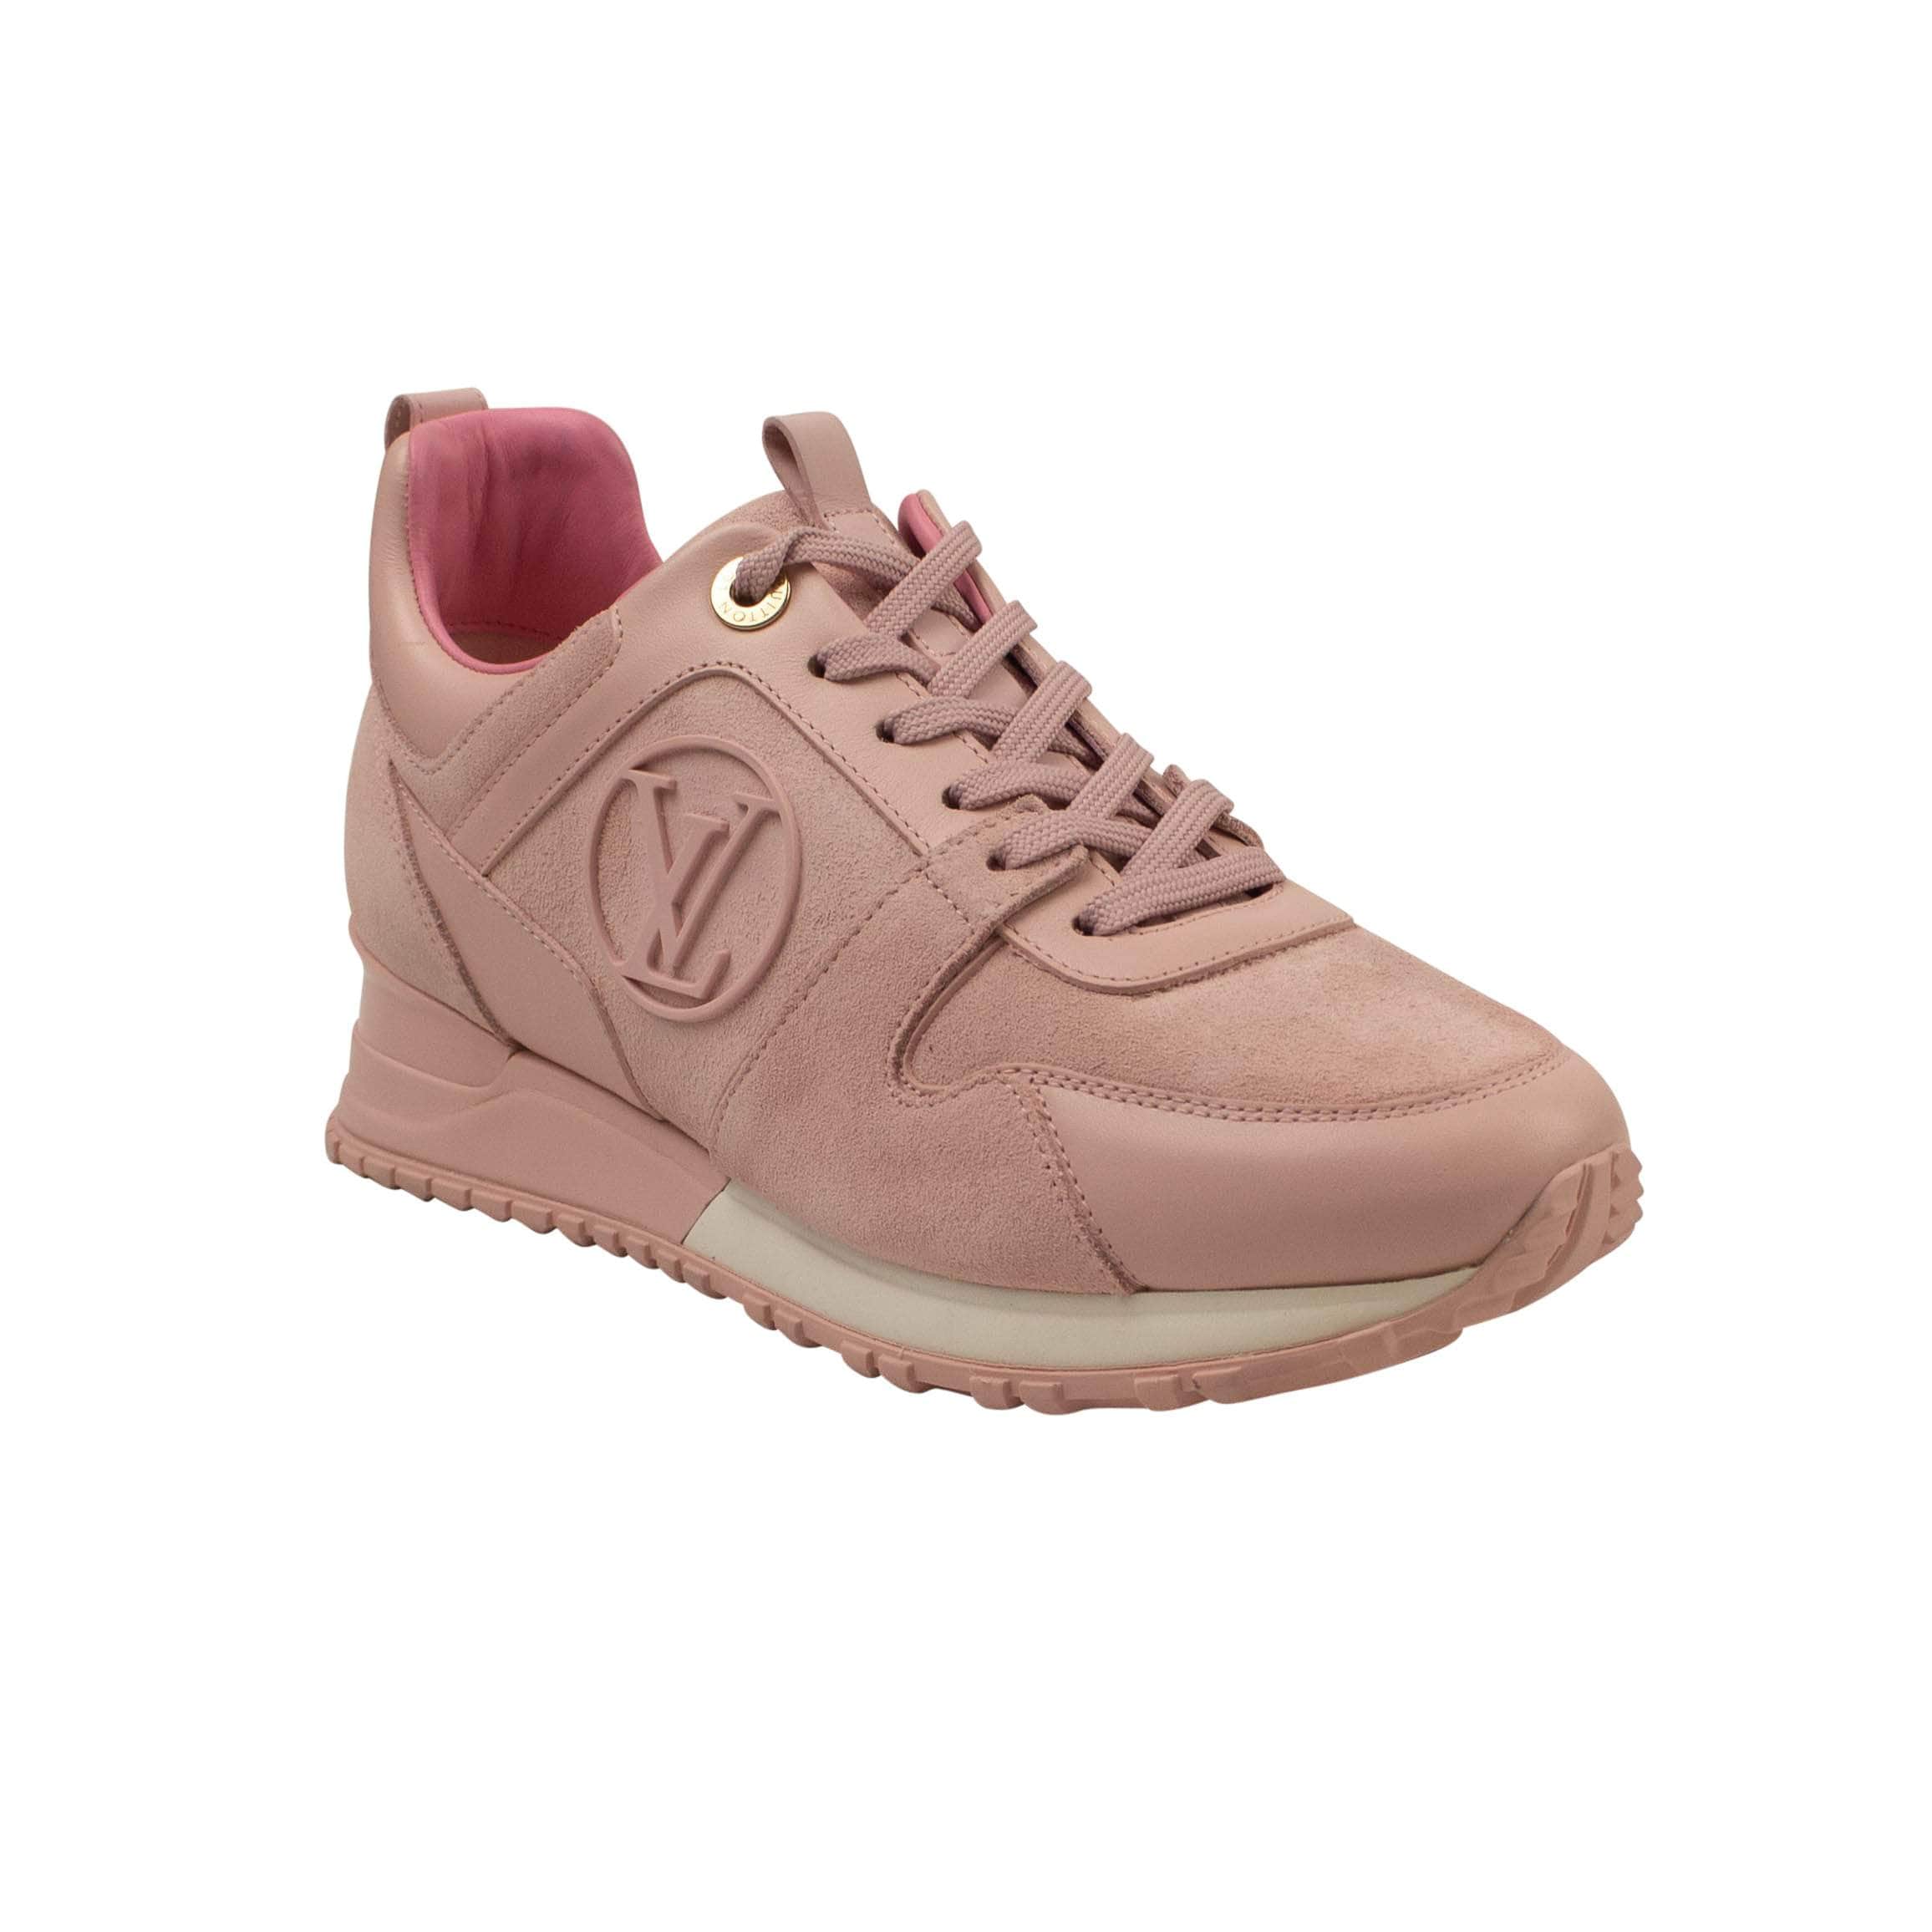 Louis Vuitton 500-750, channelenable-all, chicmi, couponcollection, gender-womens, main-shoes, size-35-5, size-37, SPO, stadiumgoods Pink Runaway Suede Sneakers